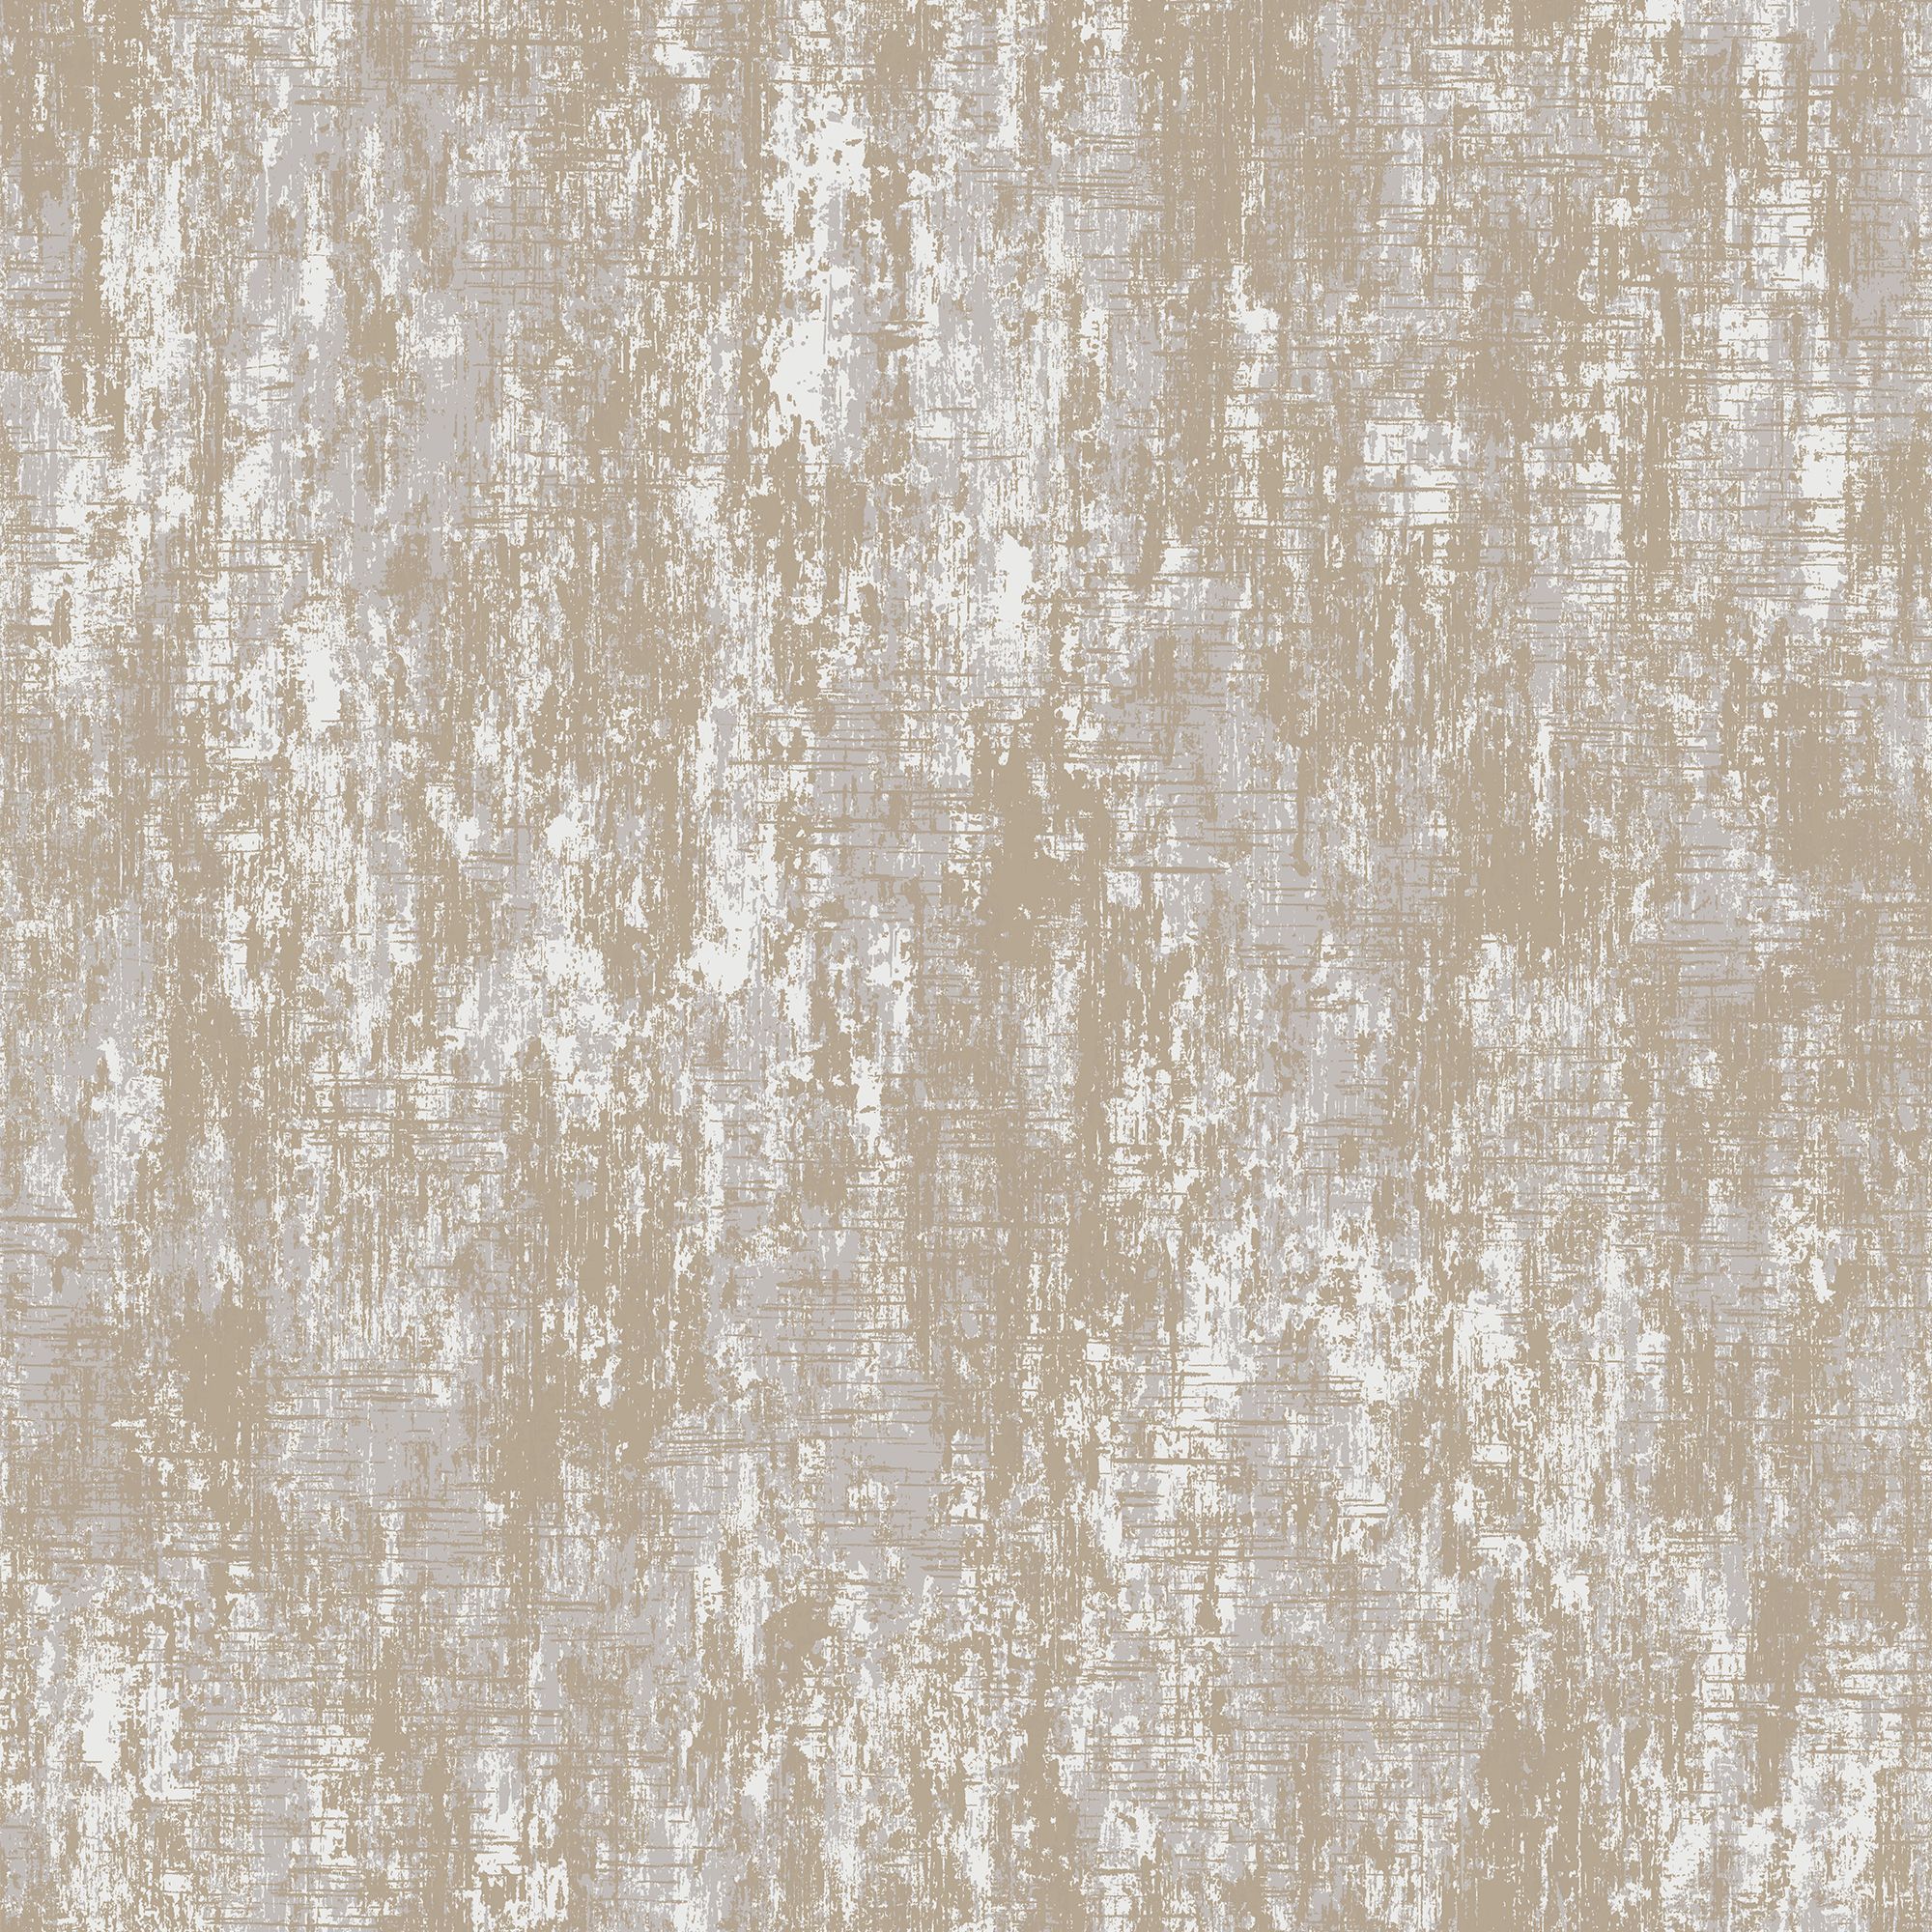 Laura Ashley Whinfell Champagne Metallic effect Industrial Smooth Wallpaper Sample